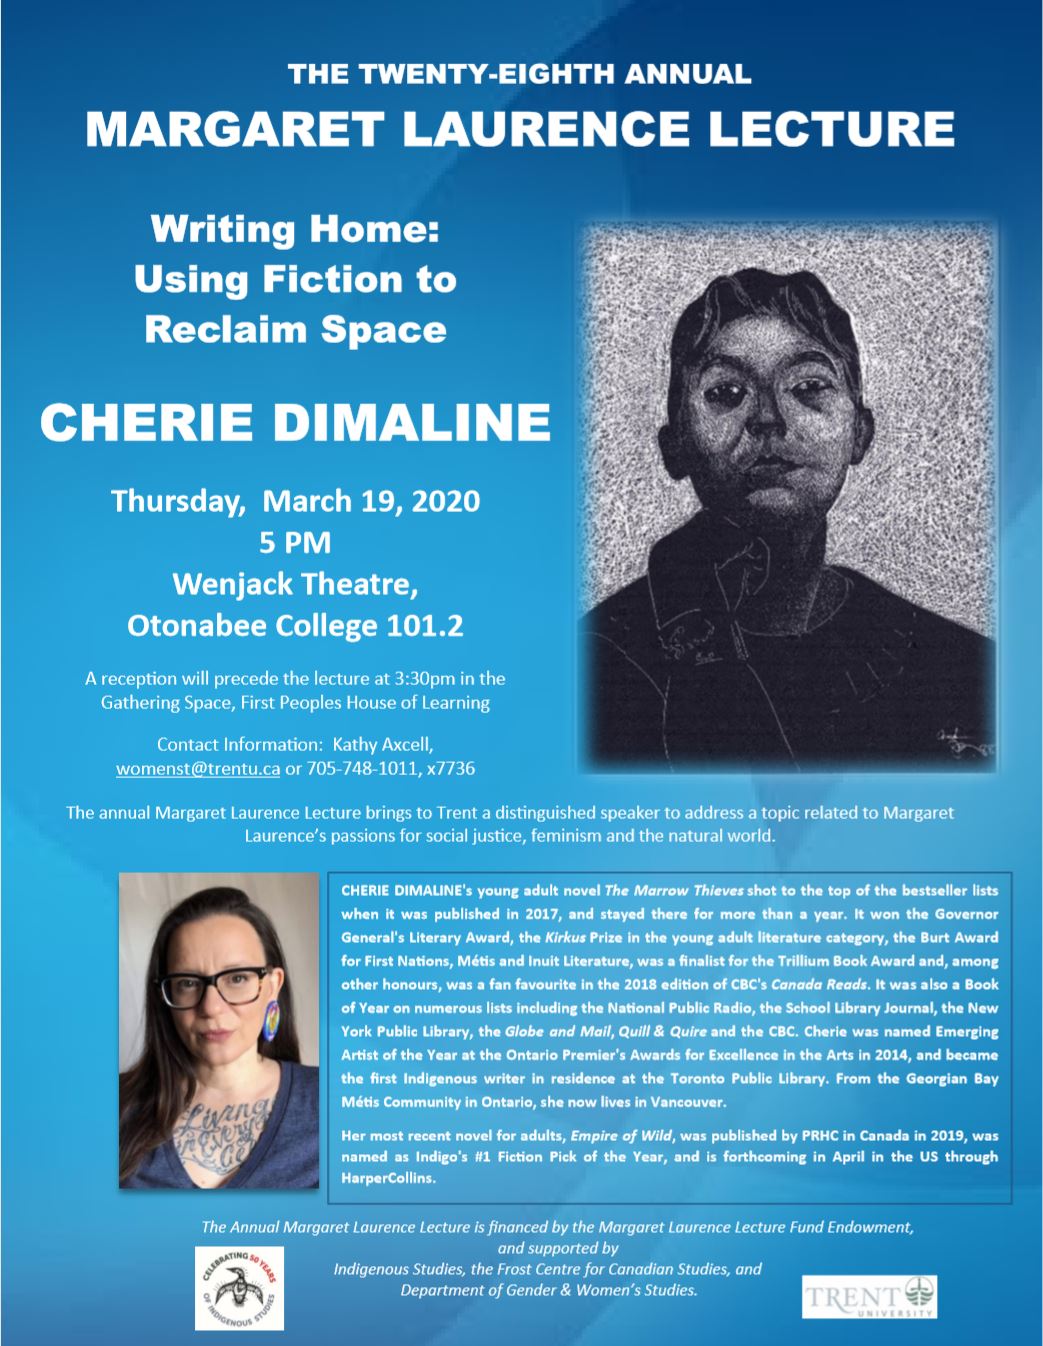 Writing Home: Using Fiction to Reclaim Space - Award-winning author Cherie Dimaline delivers the 28th annual Maragret Laurence Lecture on Thursday, March 19, 2020 at 5:00 pm in Wenjack Theatre, Otonabee College 101.2. A reception will precede the lecture at 3:30 pm in the Gathering Space, First Peoples House of Learning.